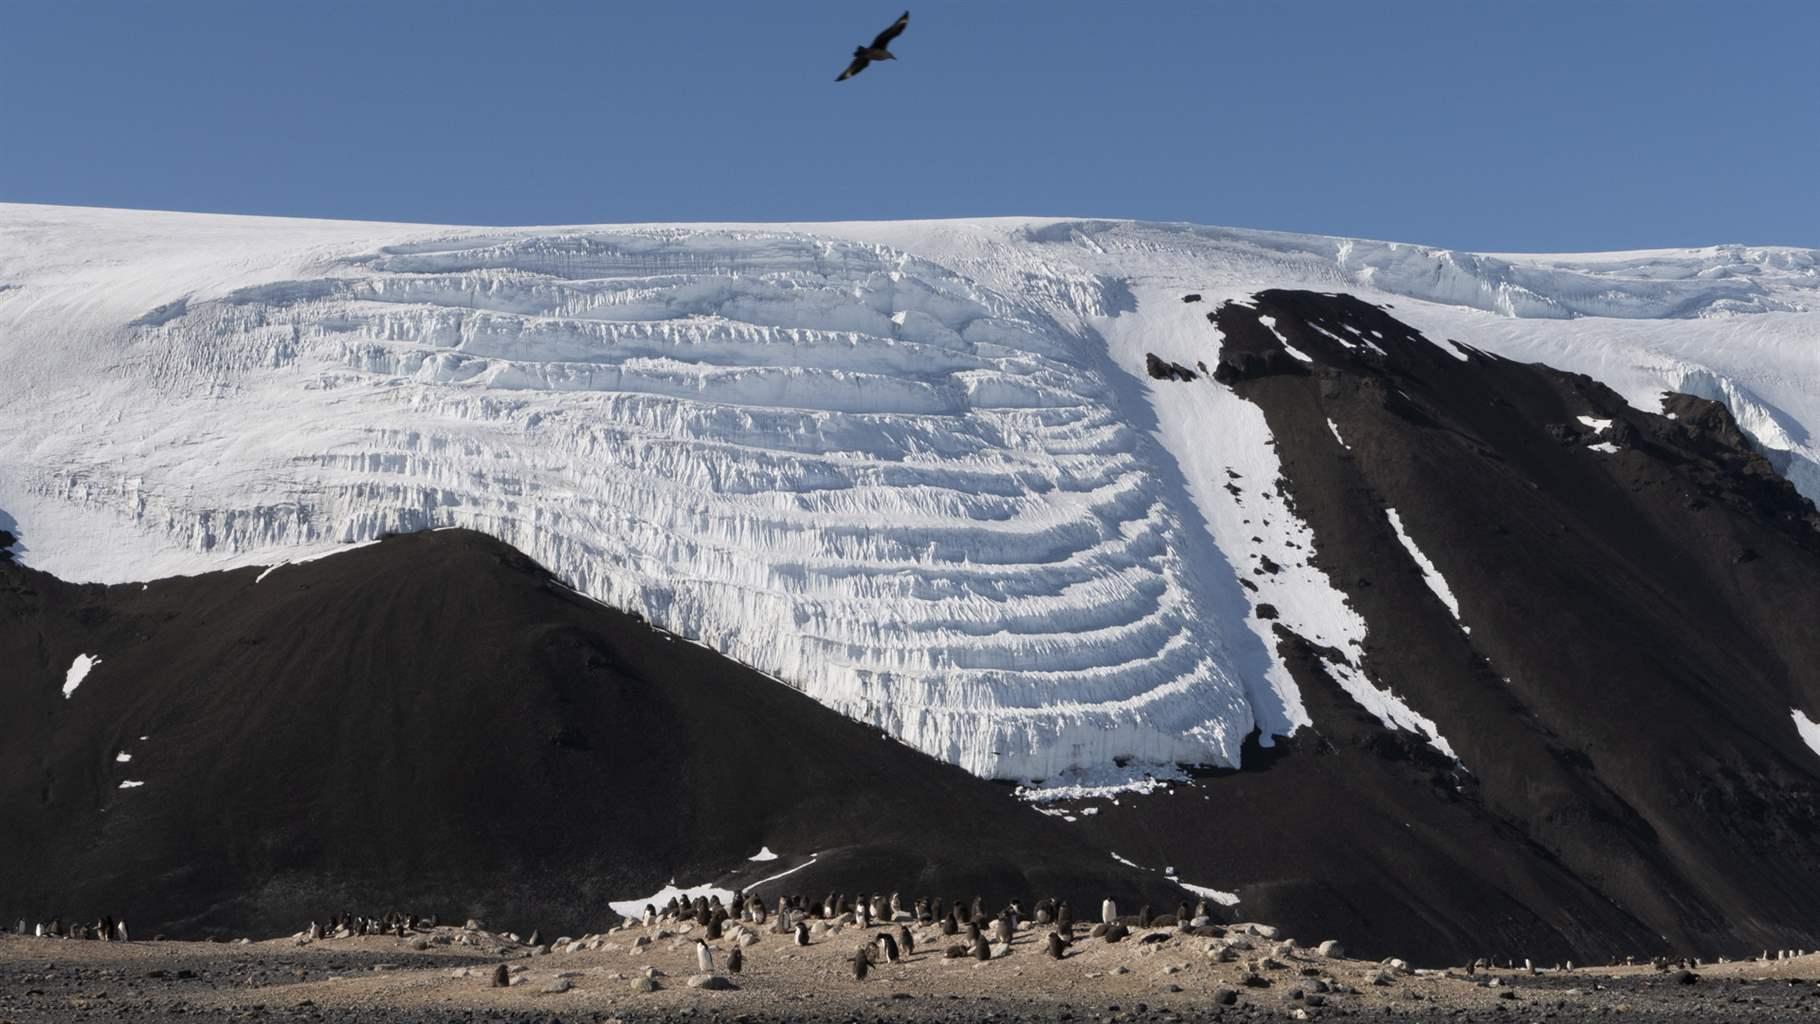 A large brown bird flies above a group of penguins that stand at the bottom of a snow-covered mountain.